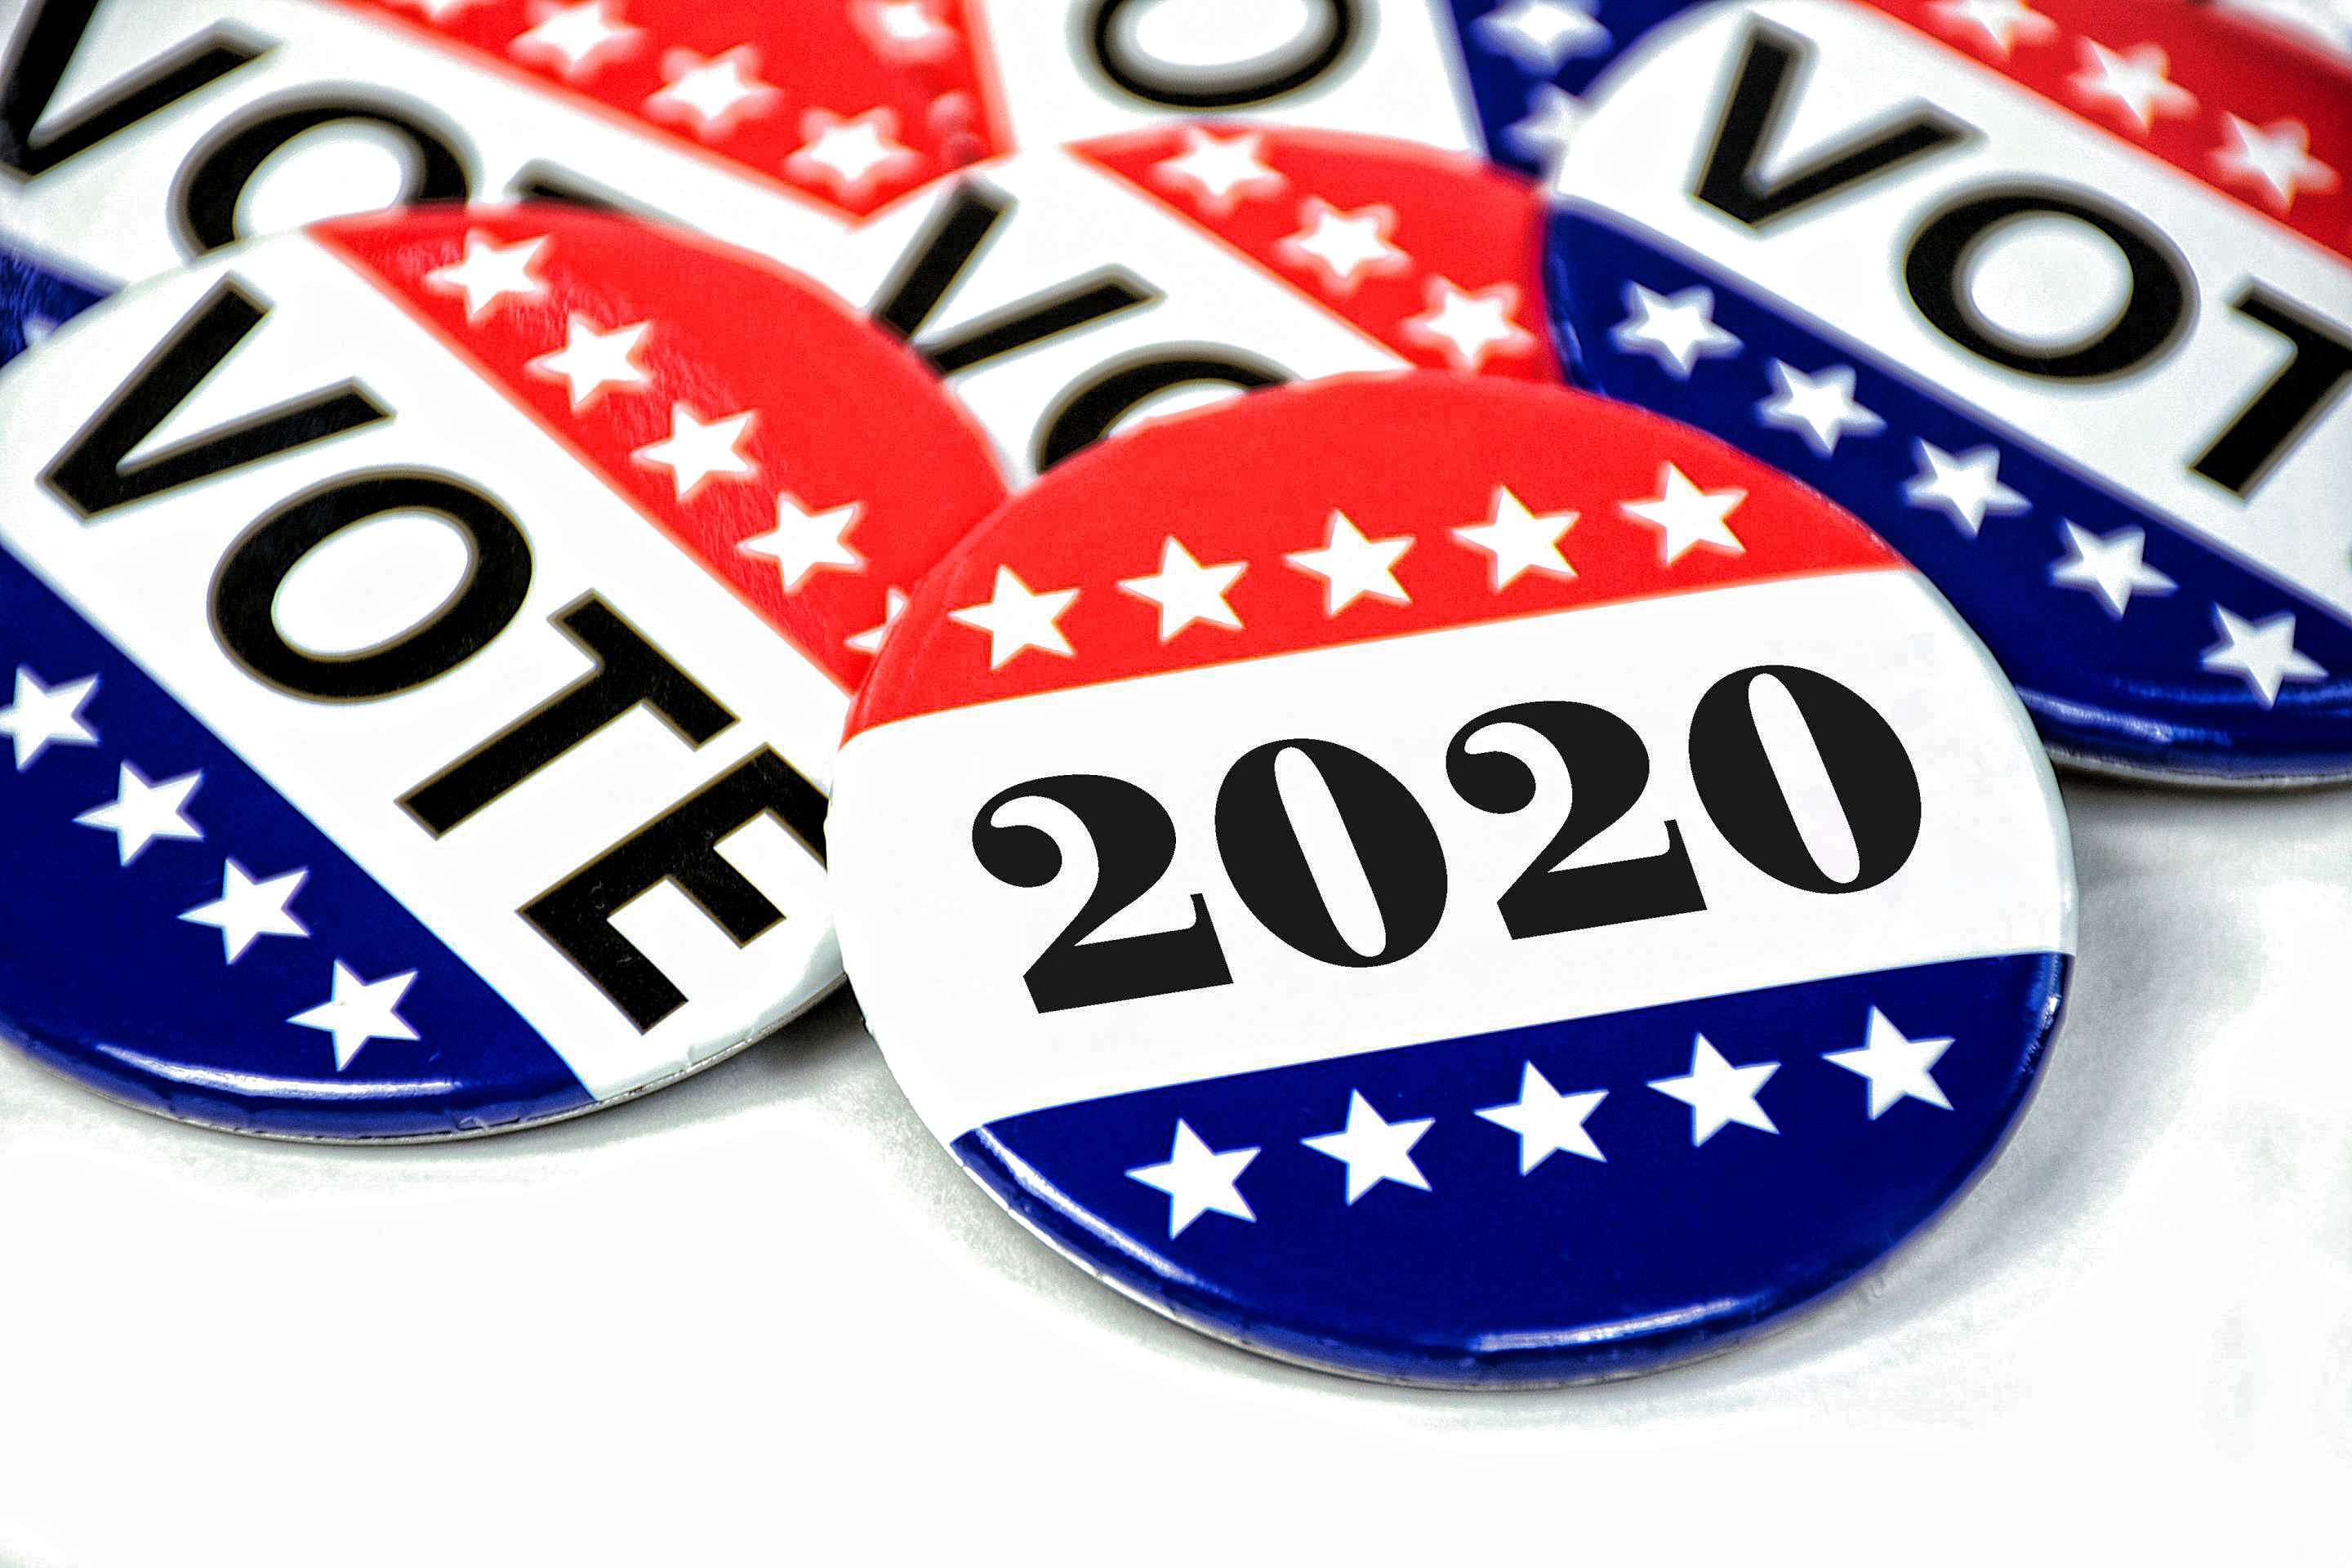 Download wallpaper 2020 United States presidential election, November elections, USA, presidential electors, concepts for desktop with resolution 2880x1920. High Quality HD picture wallpaper